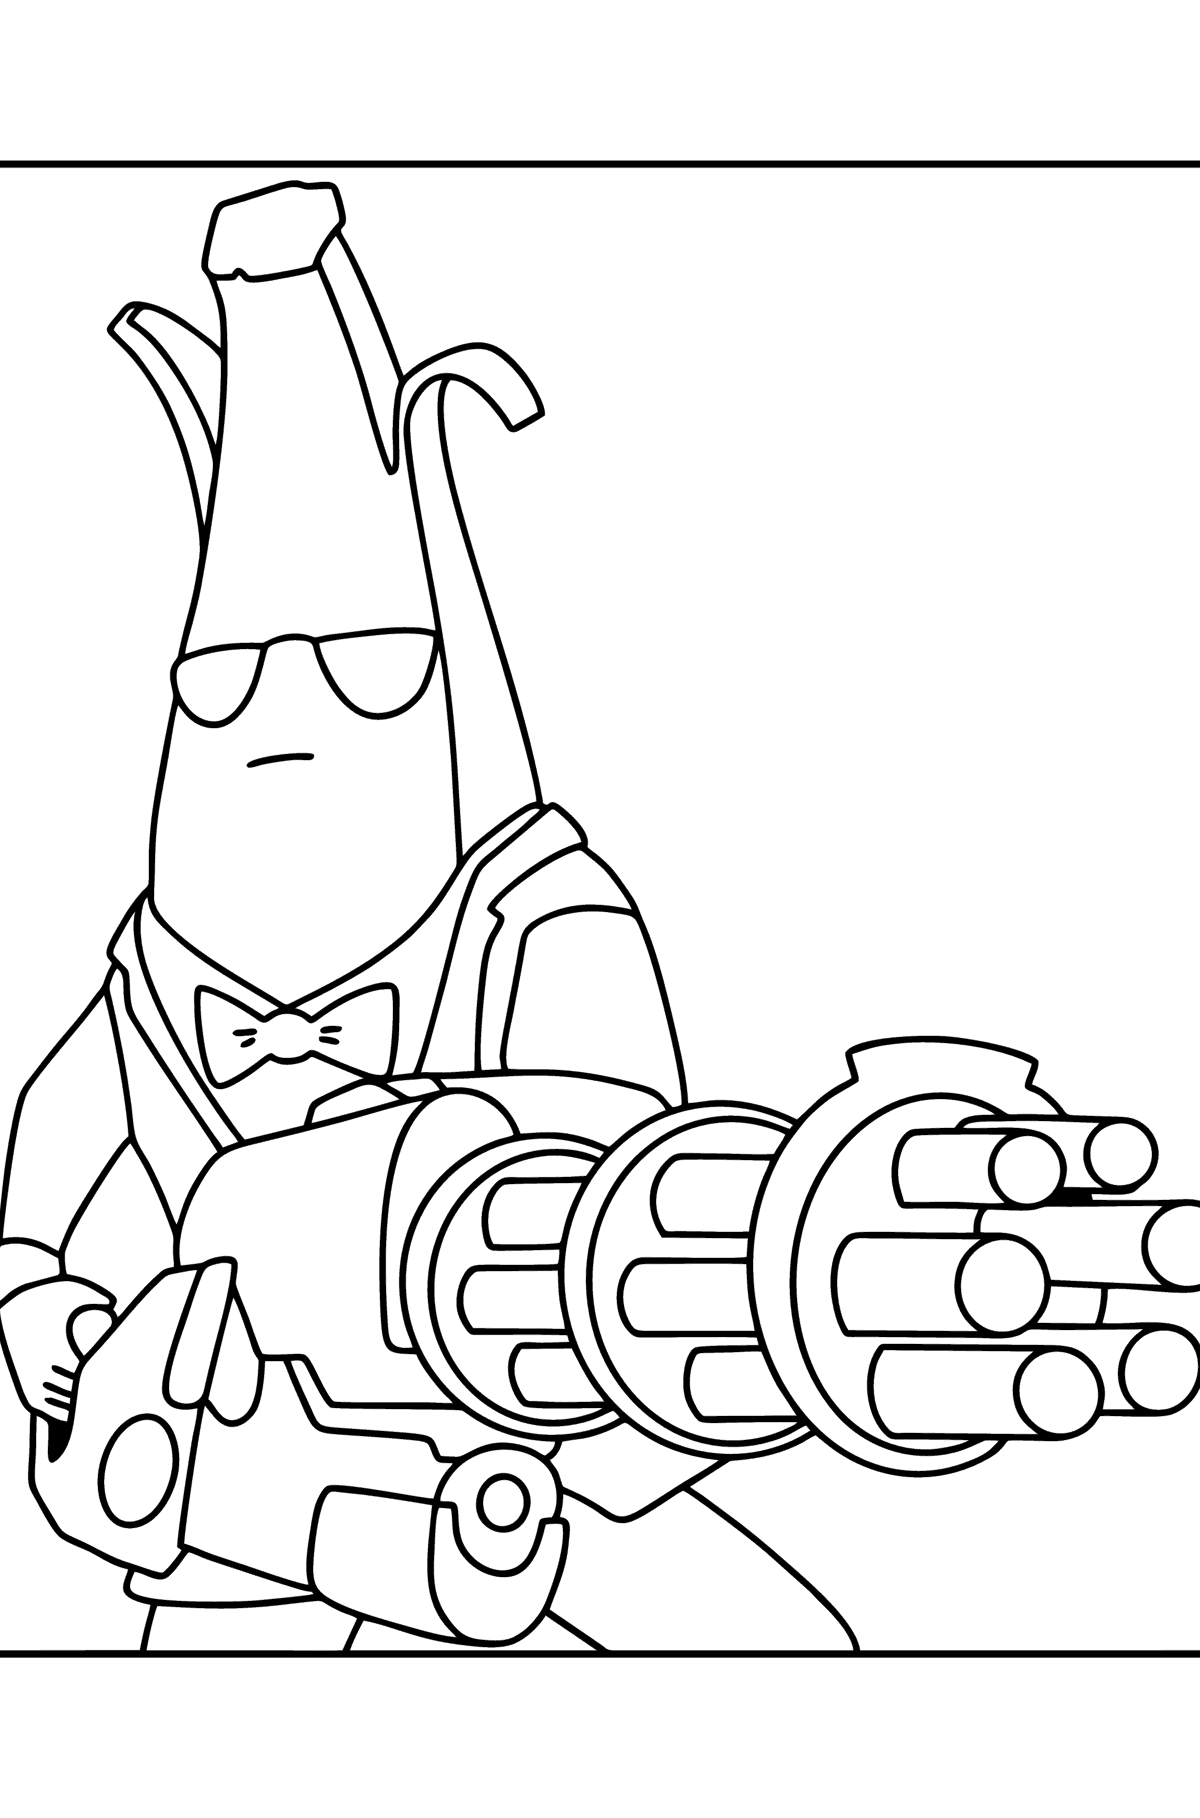 Fortnite Agent Peely coloring page - Coloring Pages for Kids